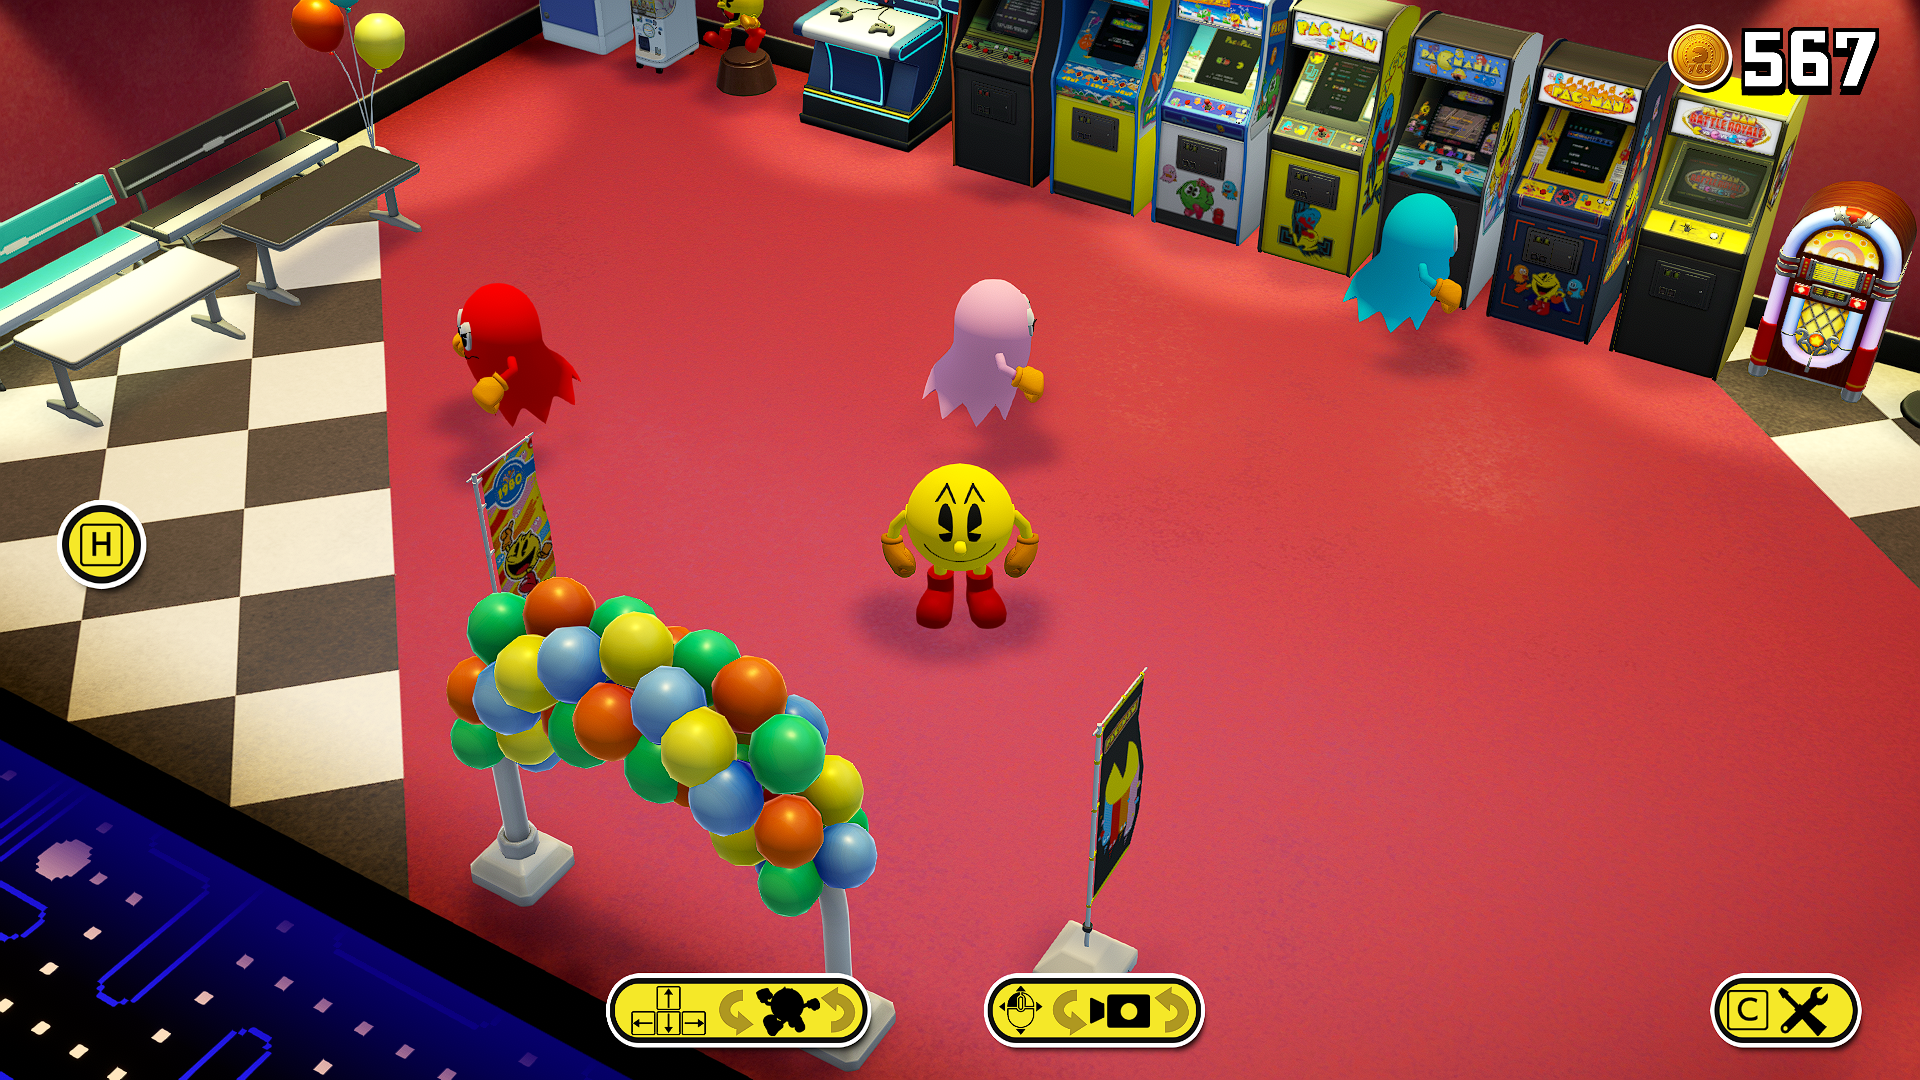 Review PAC-MAN MUSEUM